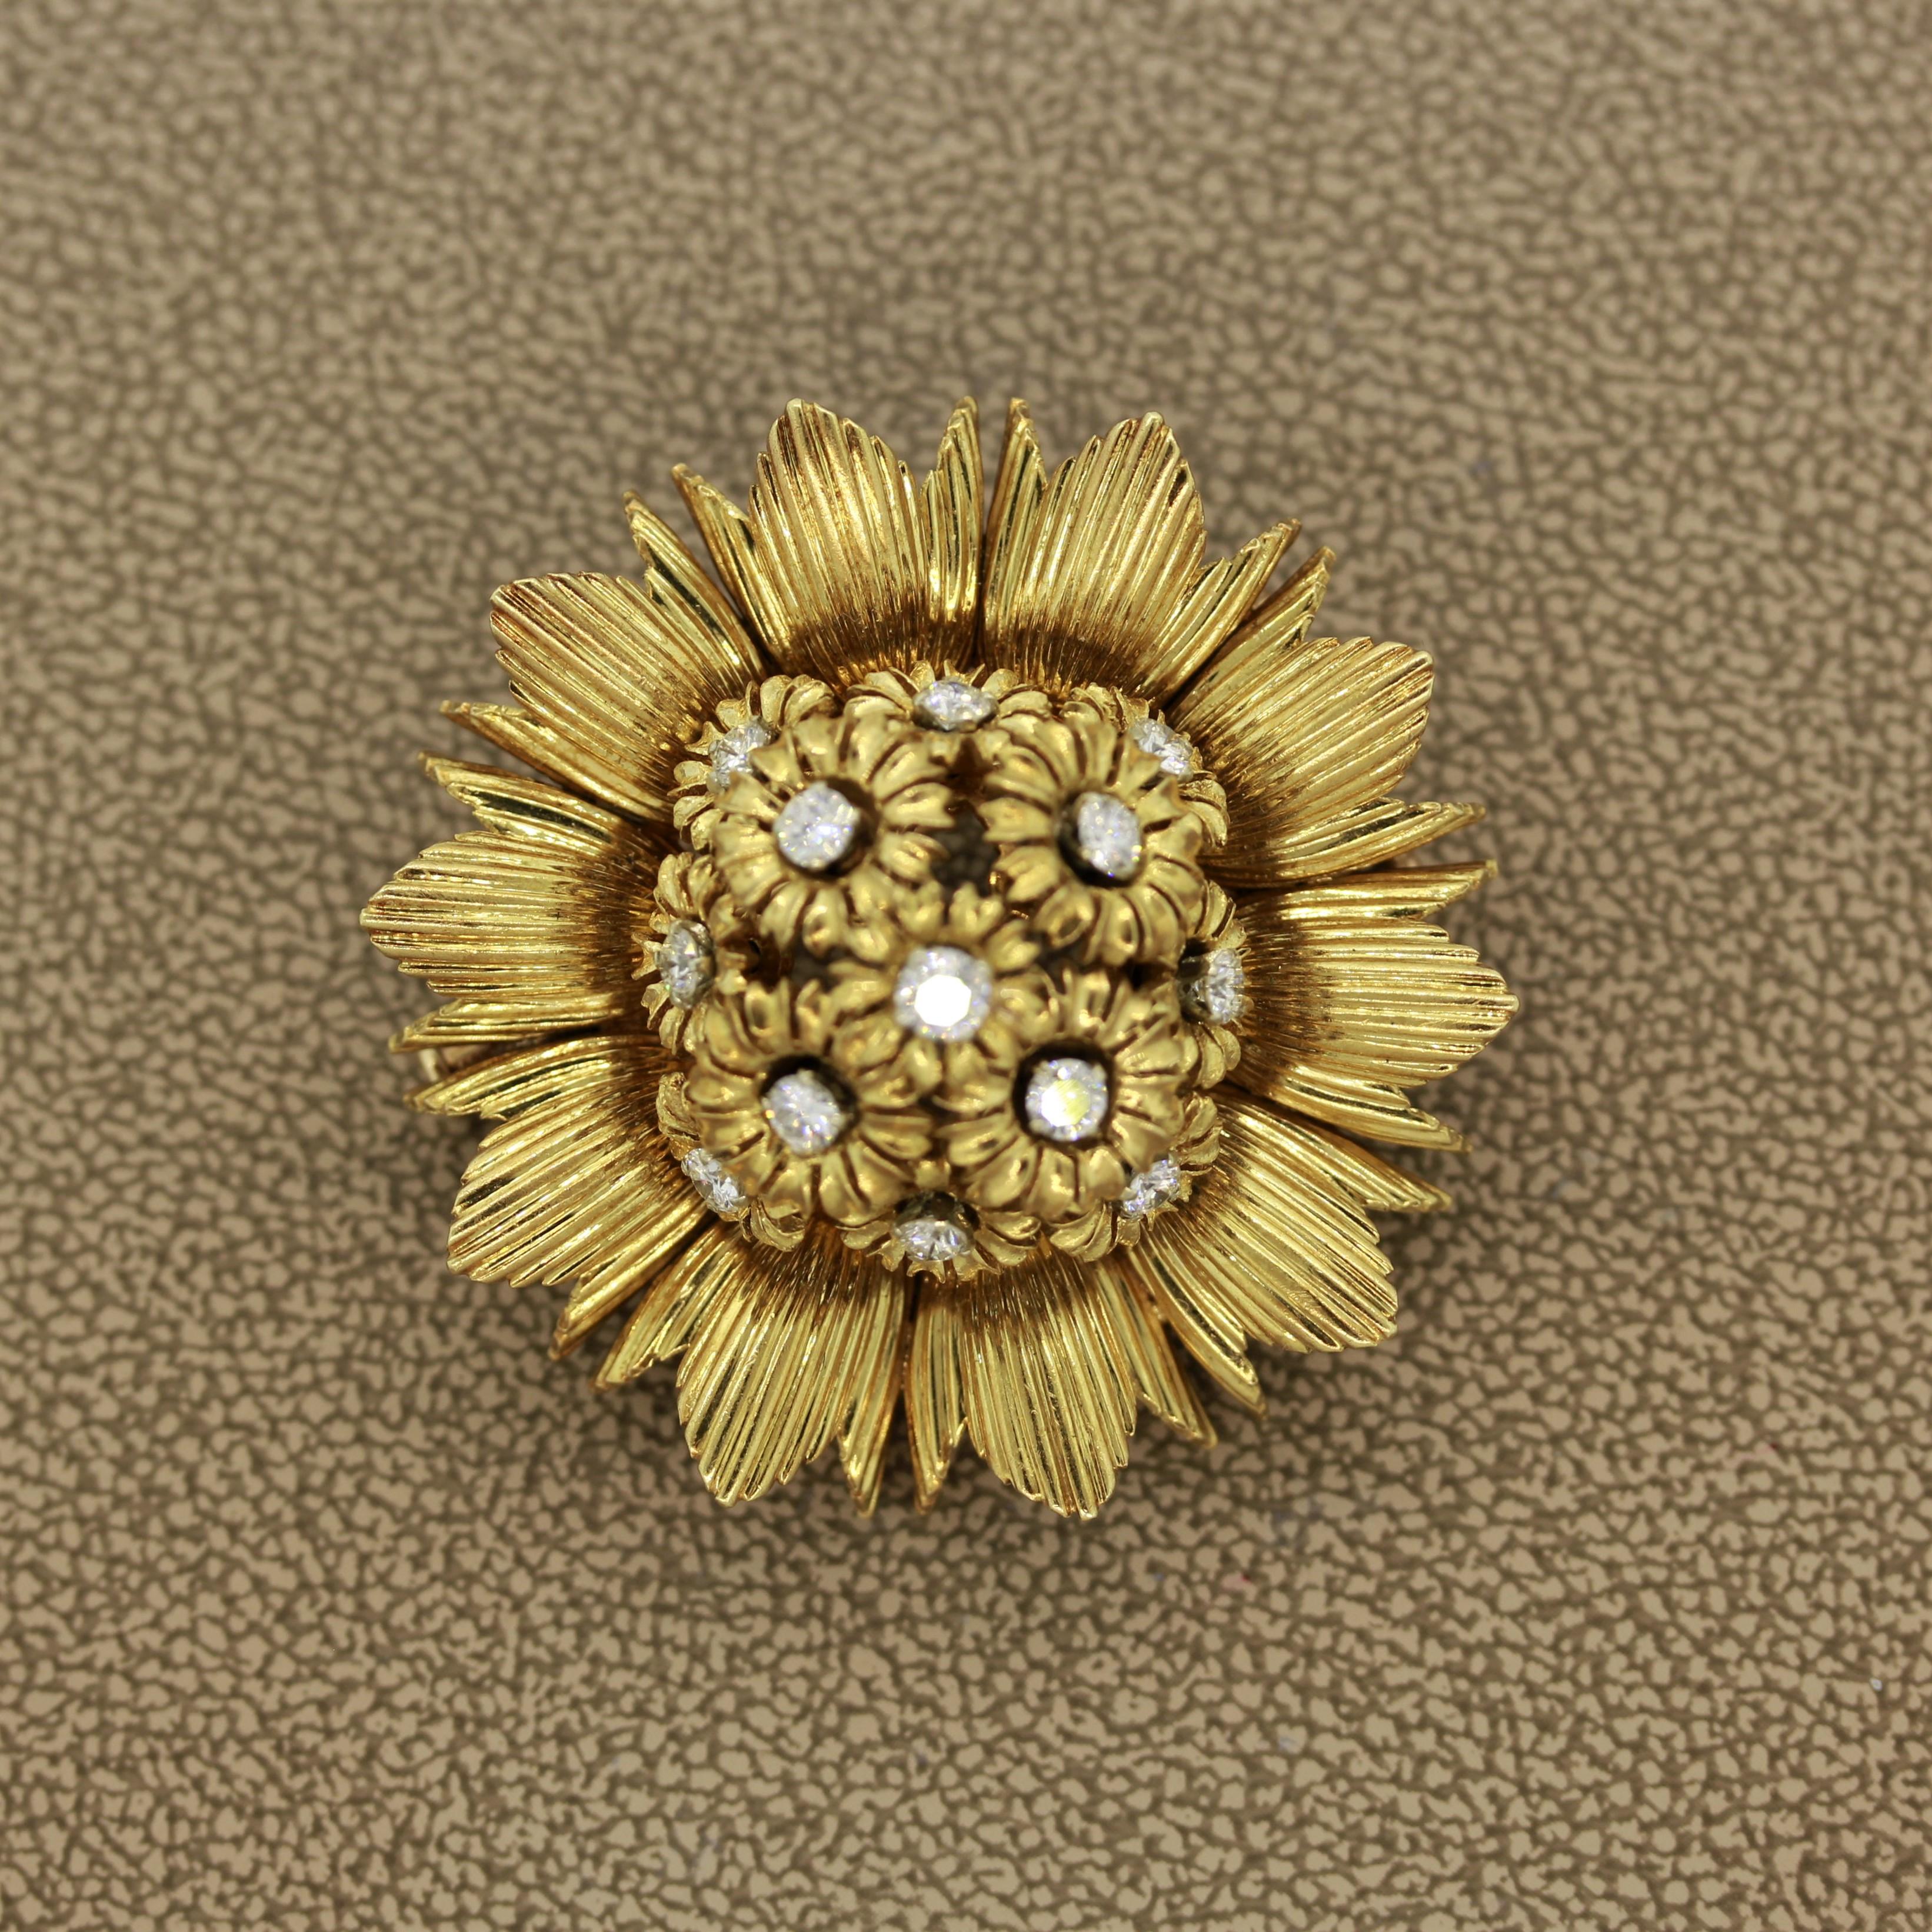 A special brooch made in France of a blossomed sunflower. It features 1.50 carats of round cut diamonds set in the center of each flower. Made in the classic French style, each flower in the center moves and dances independently of each other. Hand